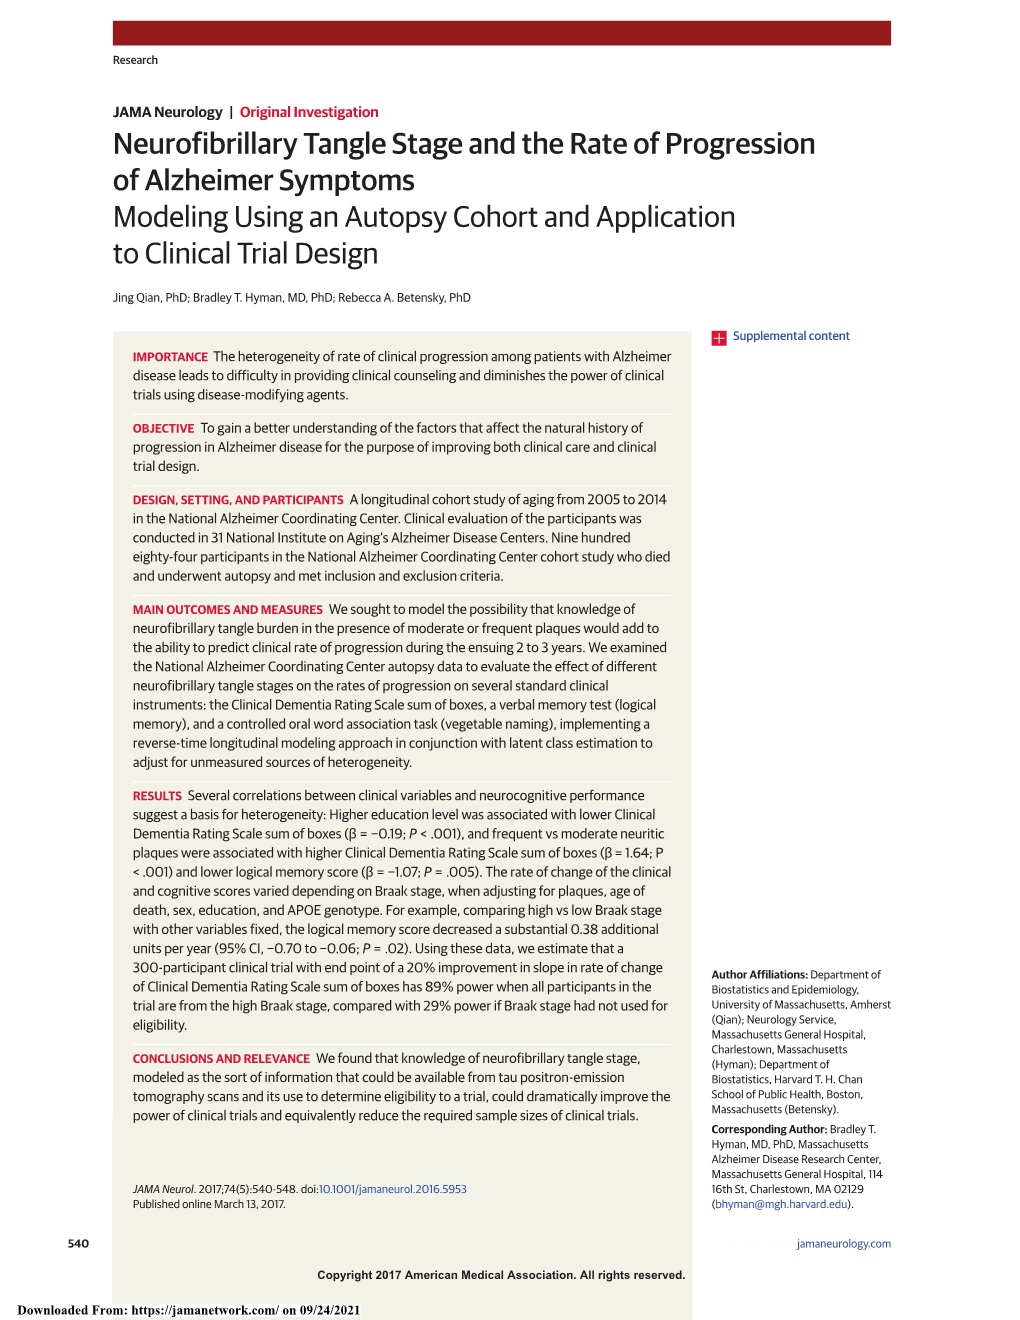 Neurofibrillary Tangle Stage and the Rate of Progression of Alzheimer Symptoms Modeling Using an Autopsy Cohort and Application to Clinical Trial Design